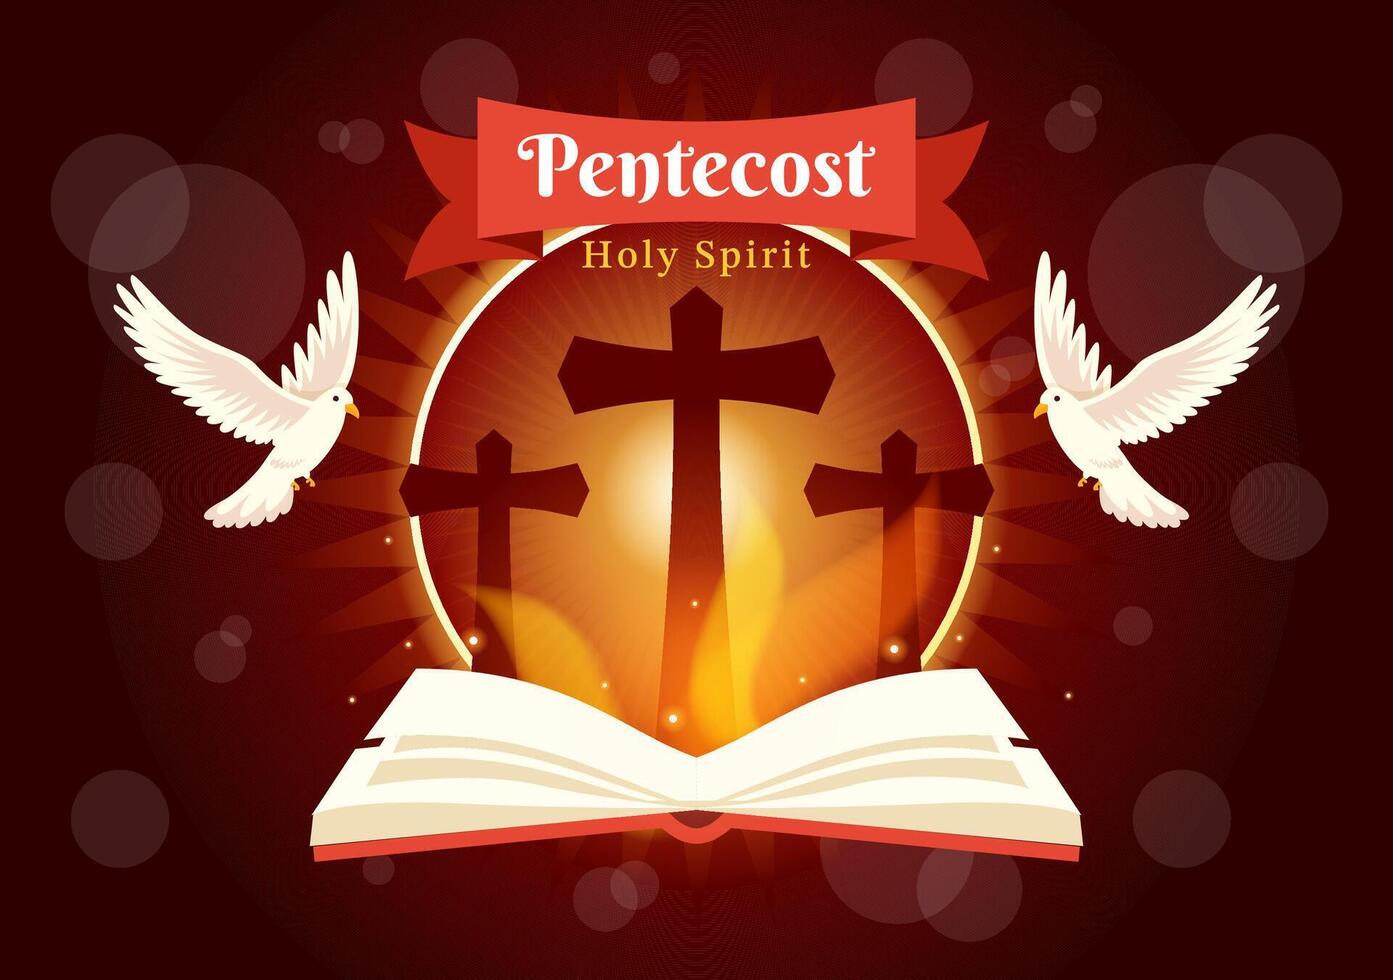 Pentecost Sunday Vector Illustration with Flame and Holy Spirit Dove in Catholics or Christians Religious Culture Holiday Flat Cartoon Background